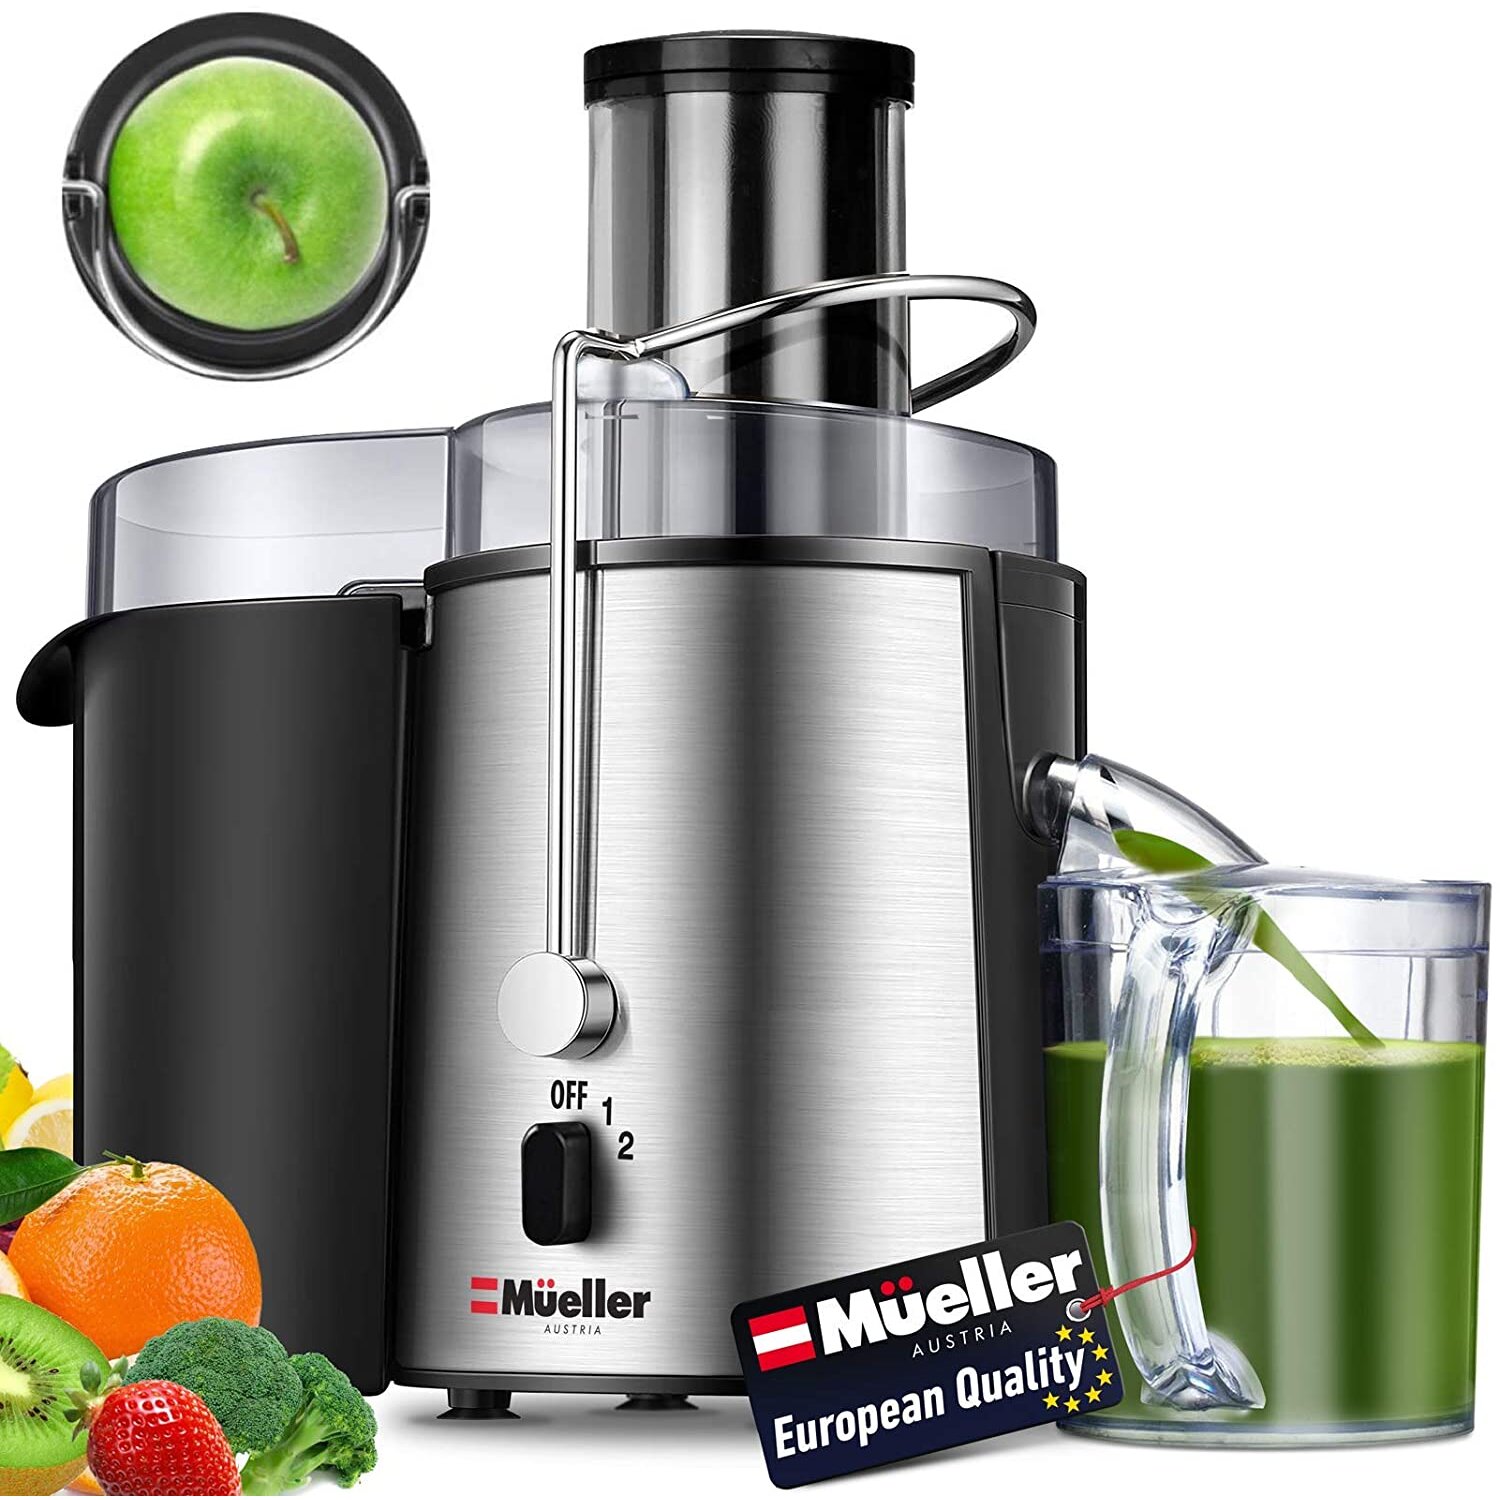 Juicer Ultra Power, Easy Clean Extractor Press Centrifugal Juicing Machine Wide 3" Feed Chute Anti-drip High Quality Large Silver